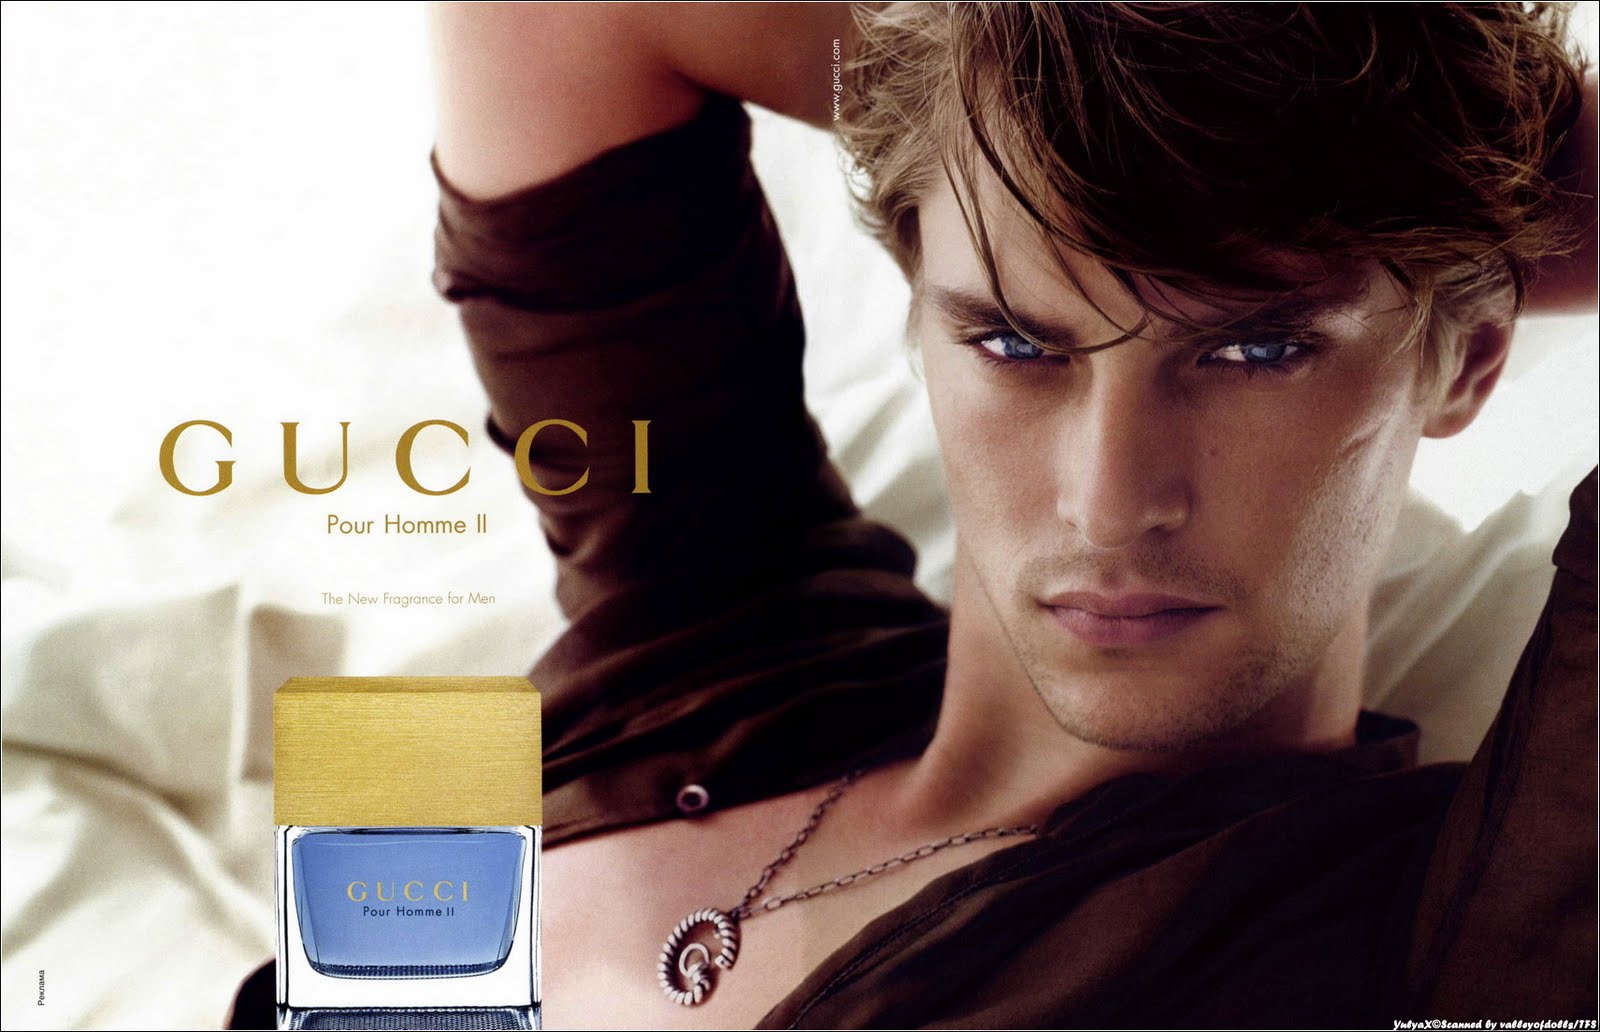 Pour homme man. Матиас Лауридсен. Gucci pour homme II. Матиас Лауридсен Gucci реклама.